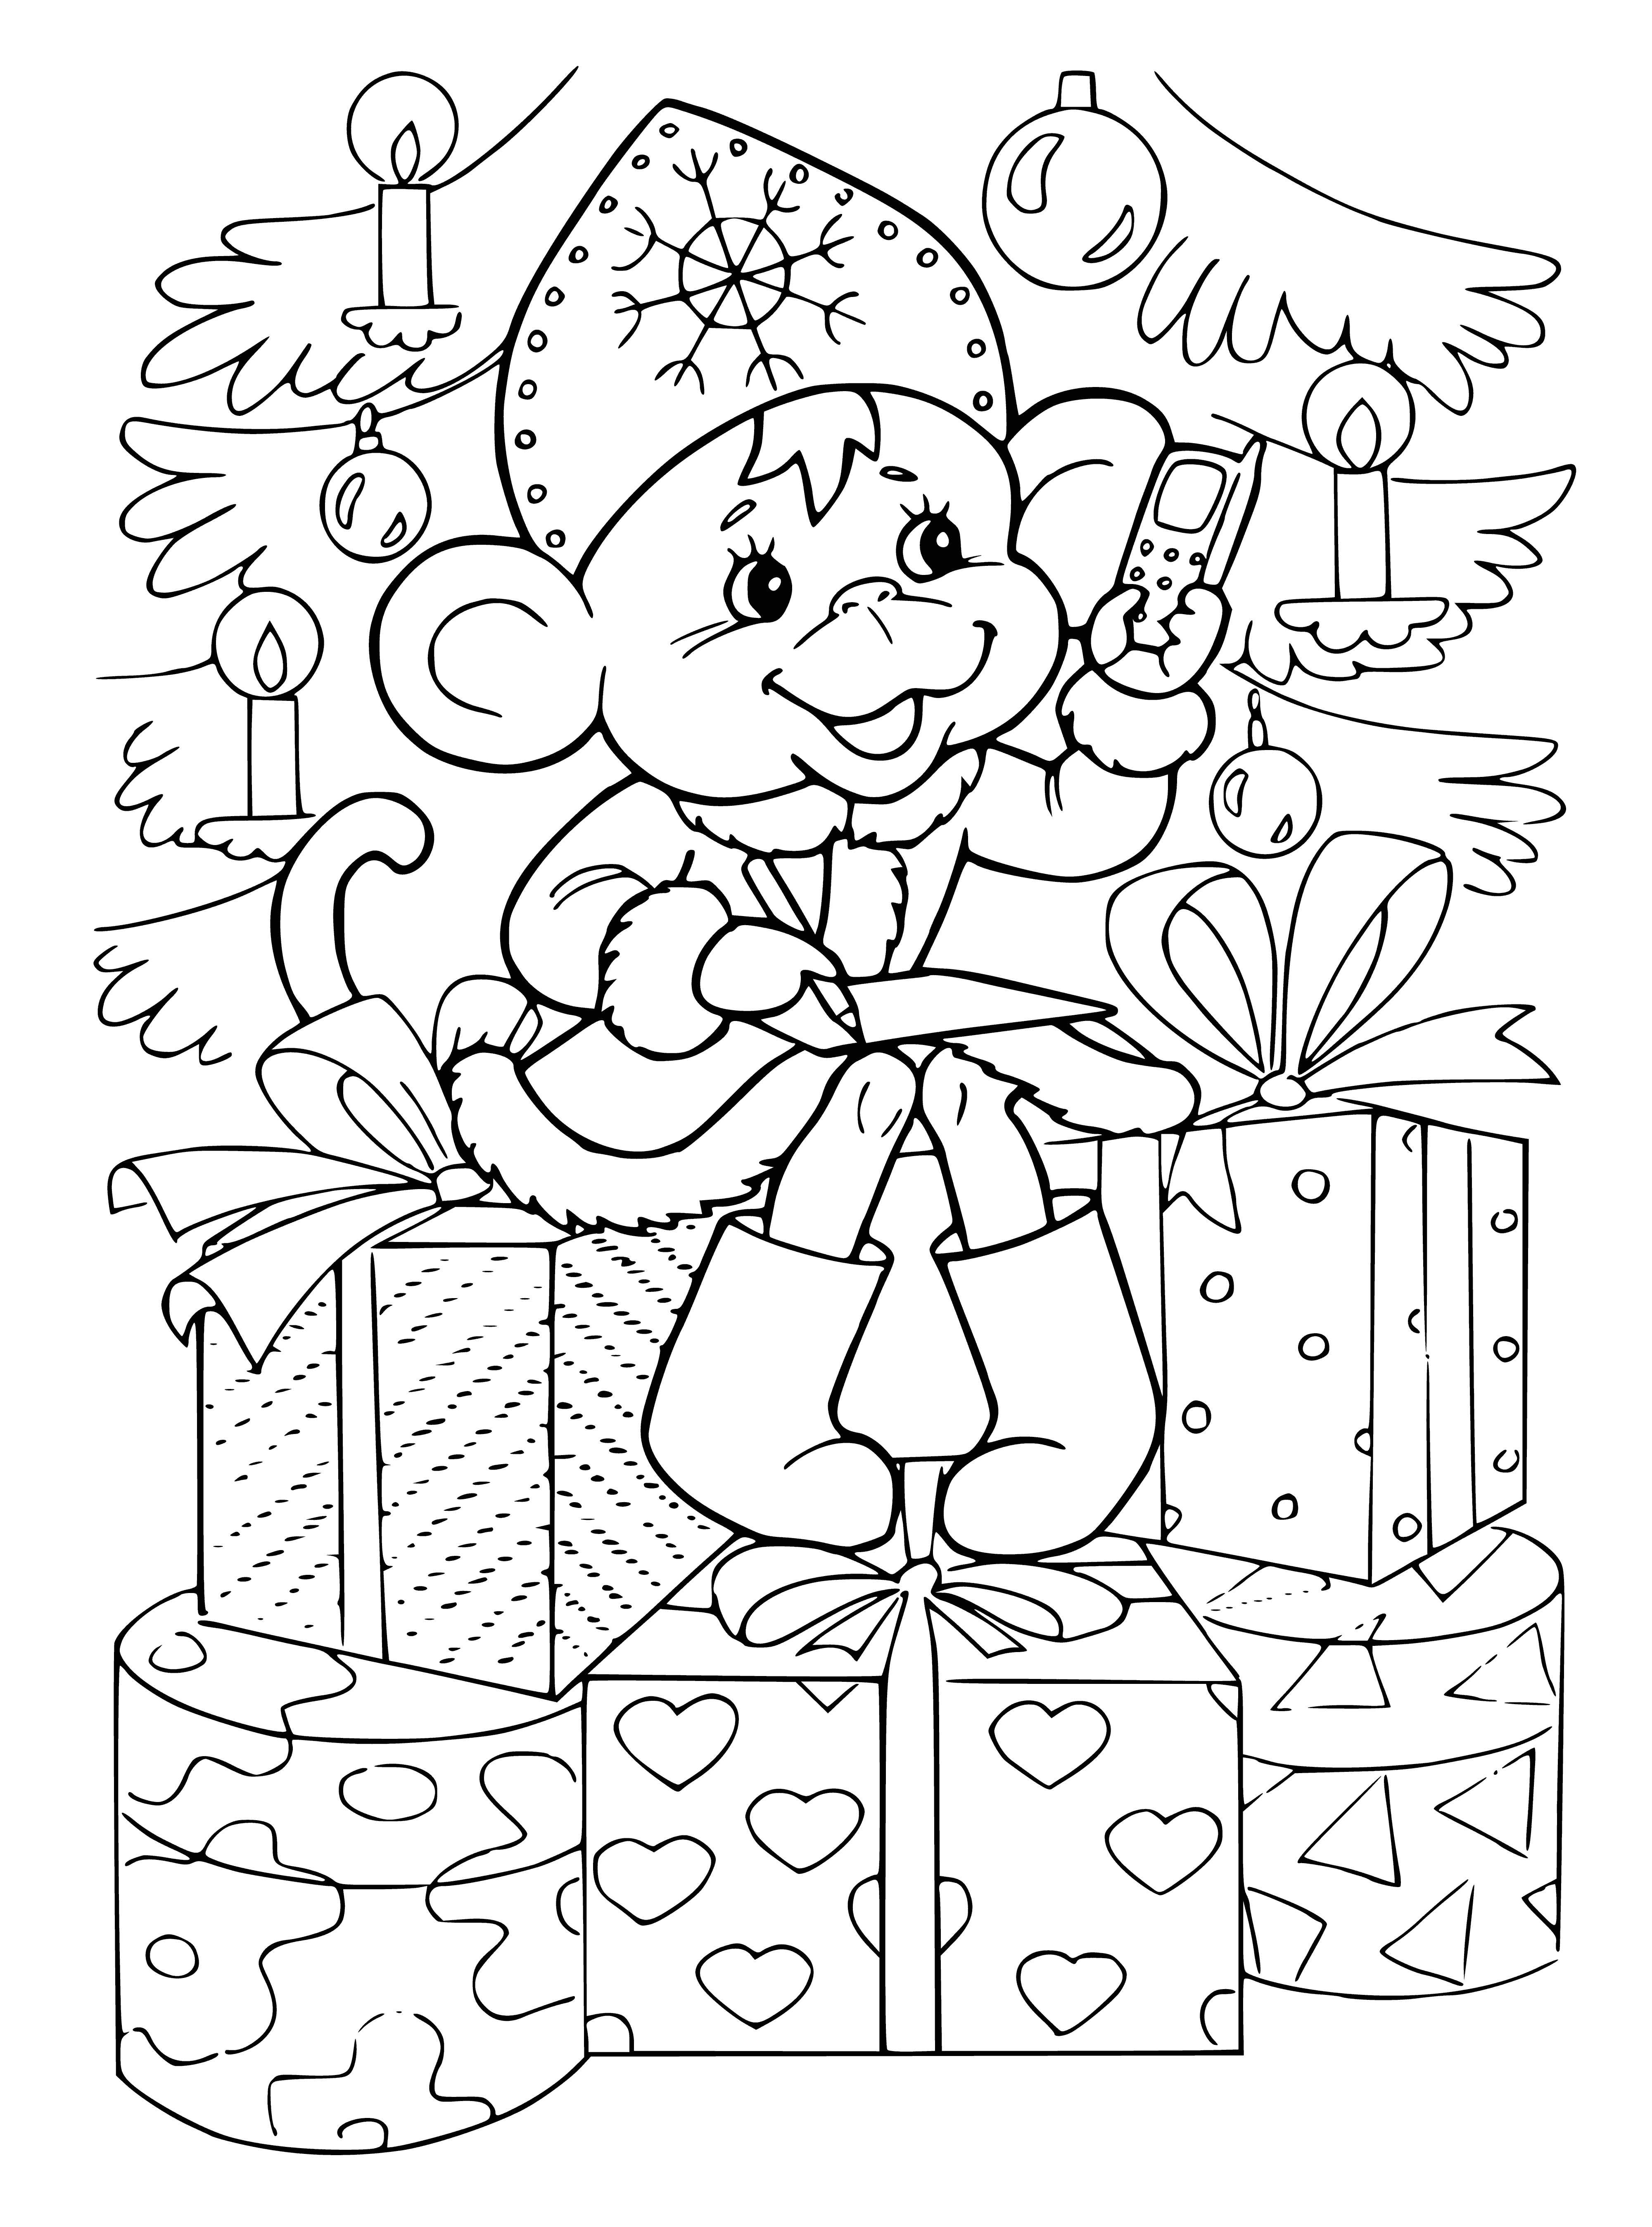 coloring page: Monkey grins atop Xmas tree, brown fur w/lighter brown face & belly, furry tail & big floppy ears. #Christmas #Monkey